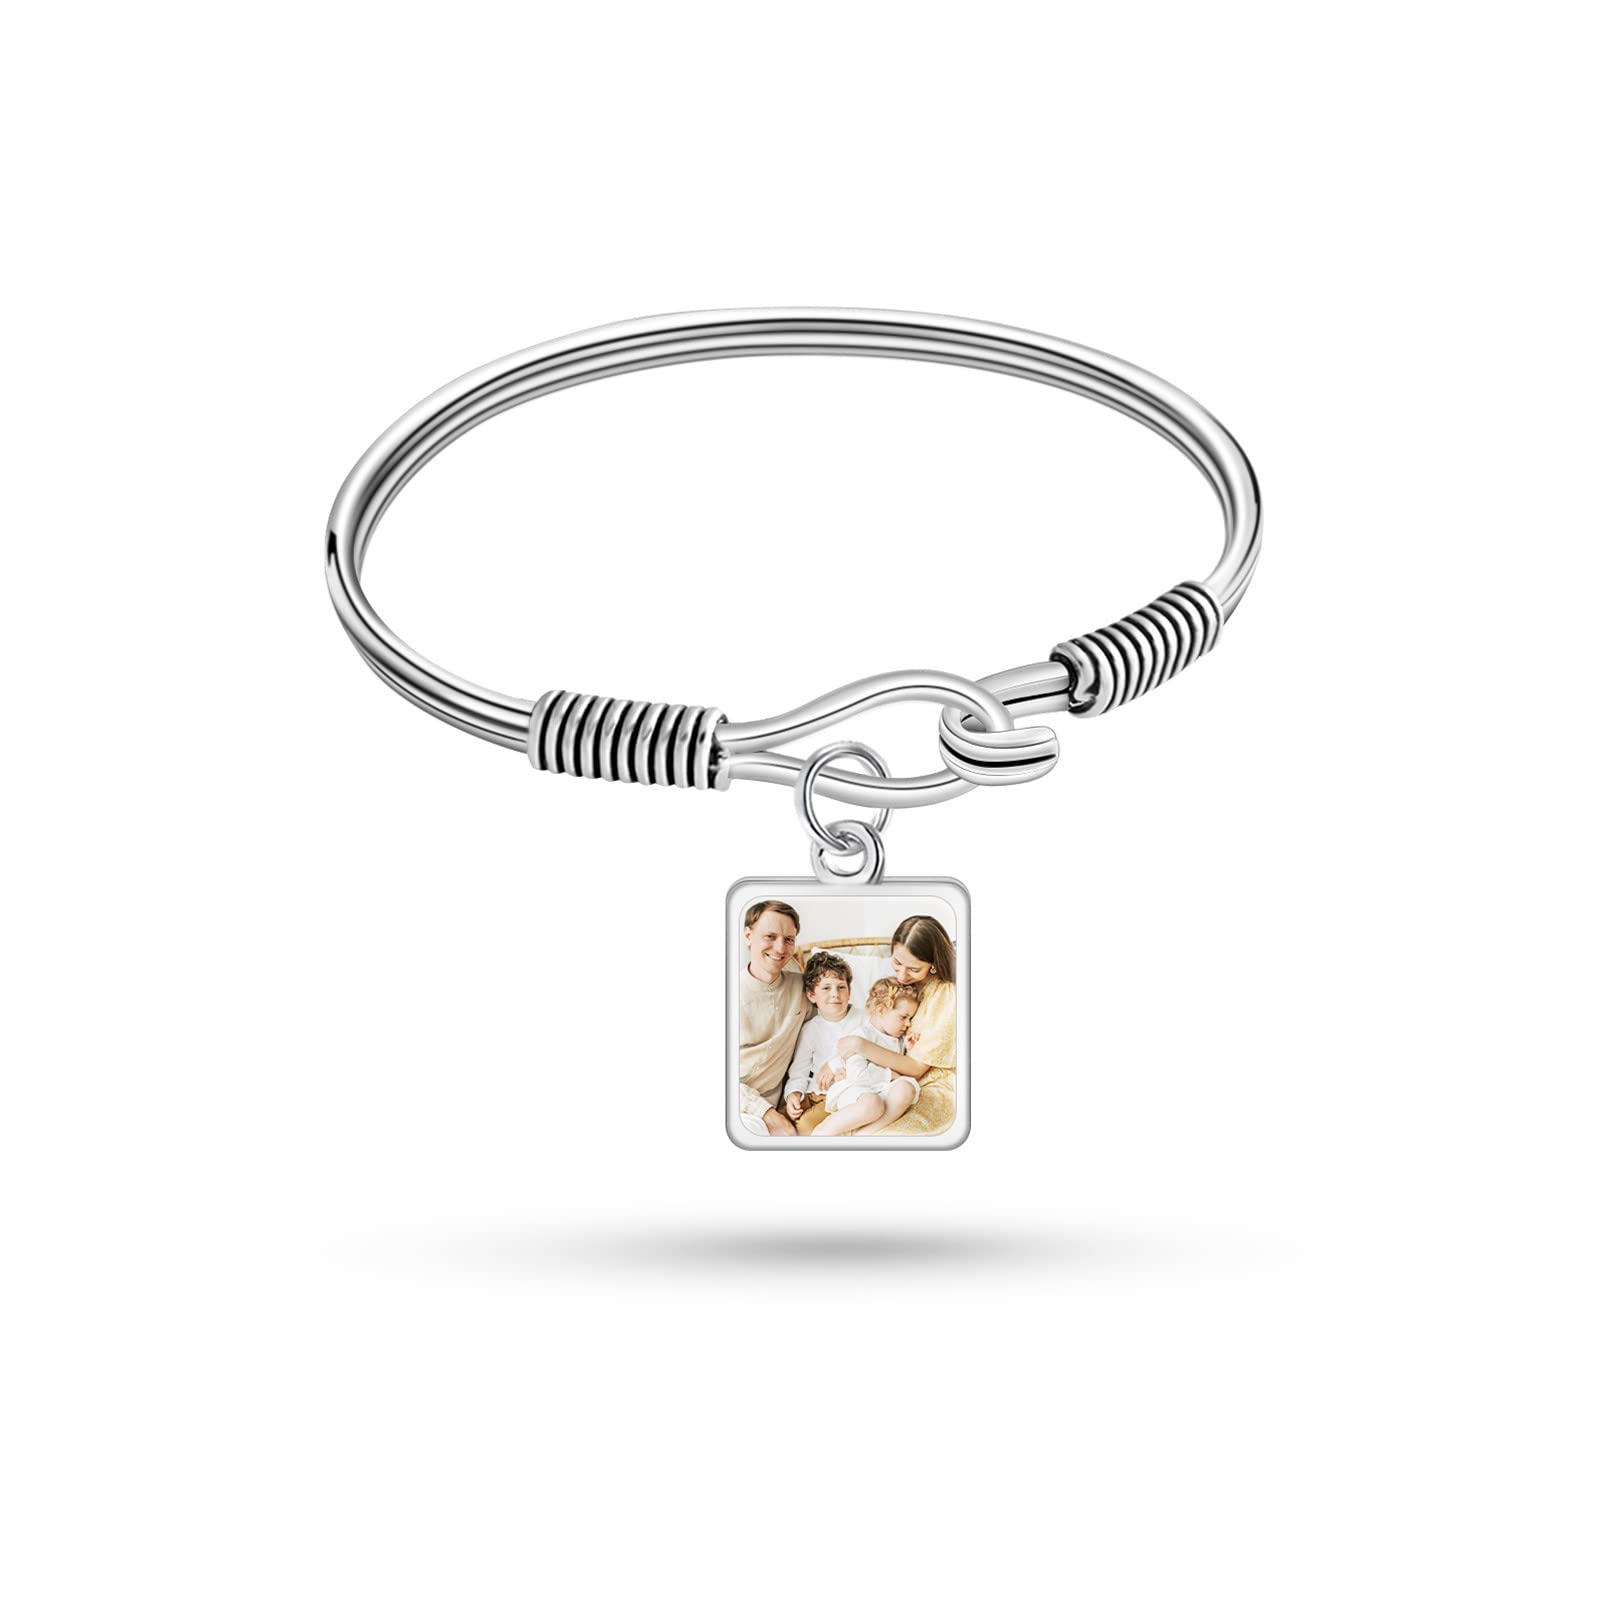 Adjustable Bracelet with Photo for Women